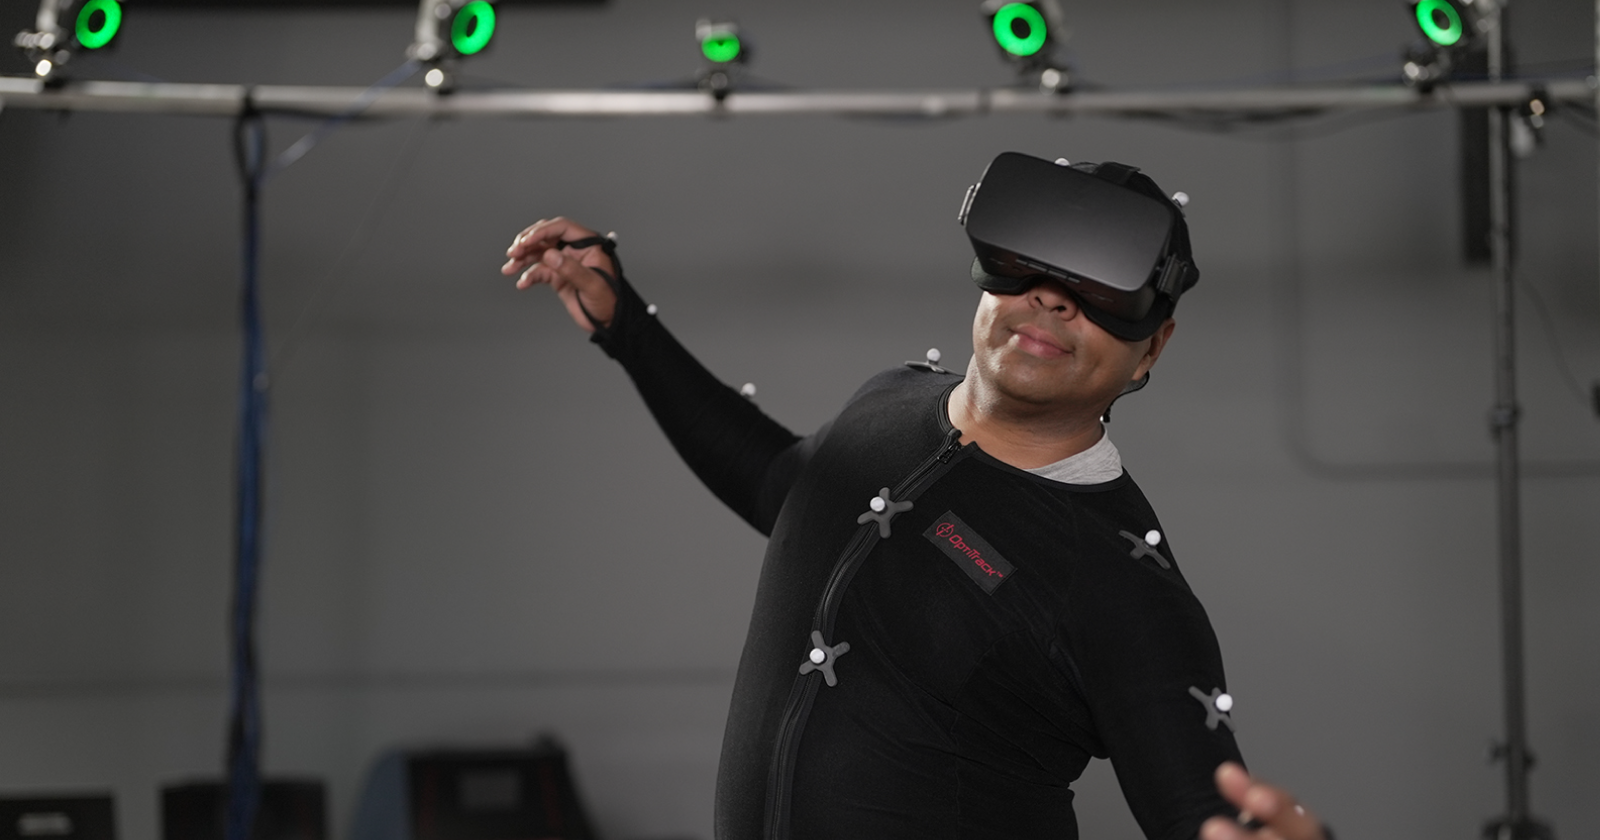 Test subject wearing a virtual reality headset. Exponent researchers analyze human behaviors.